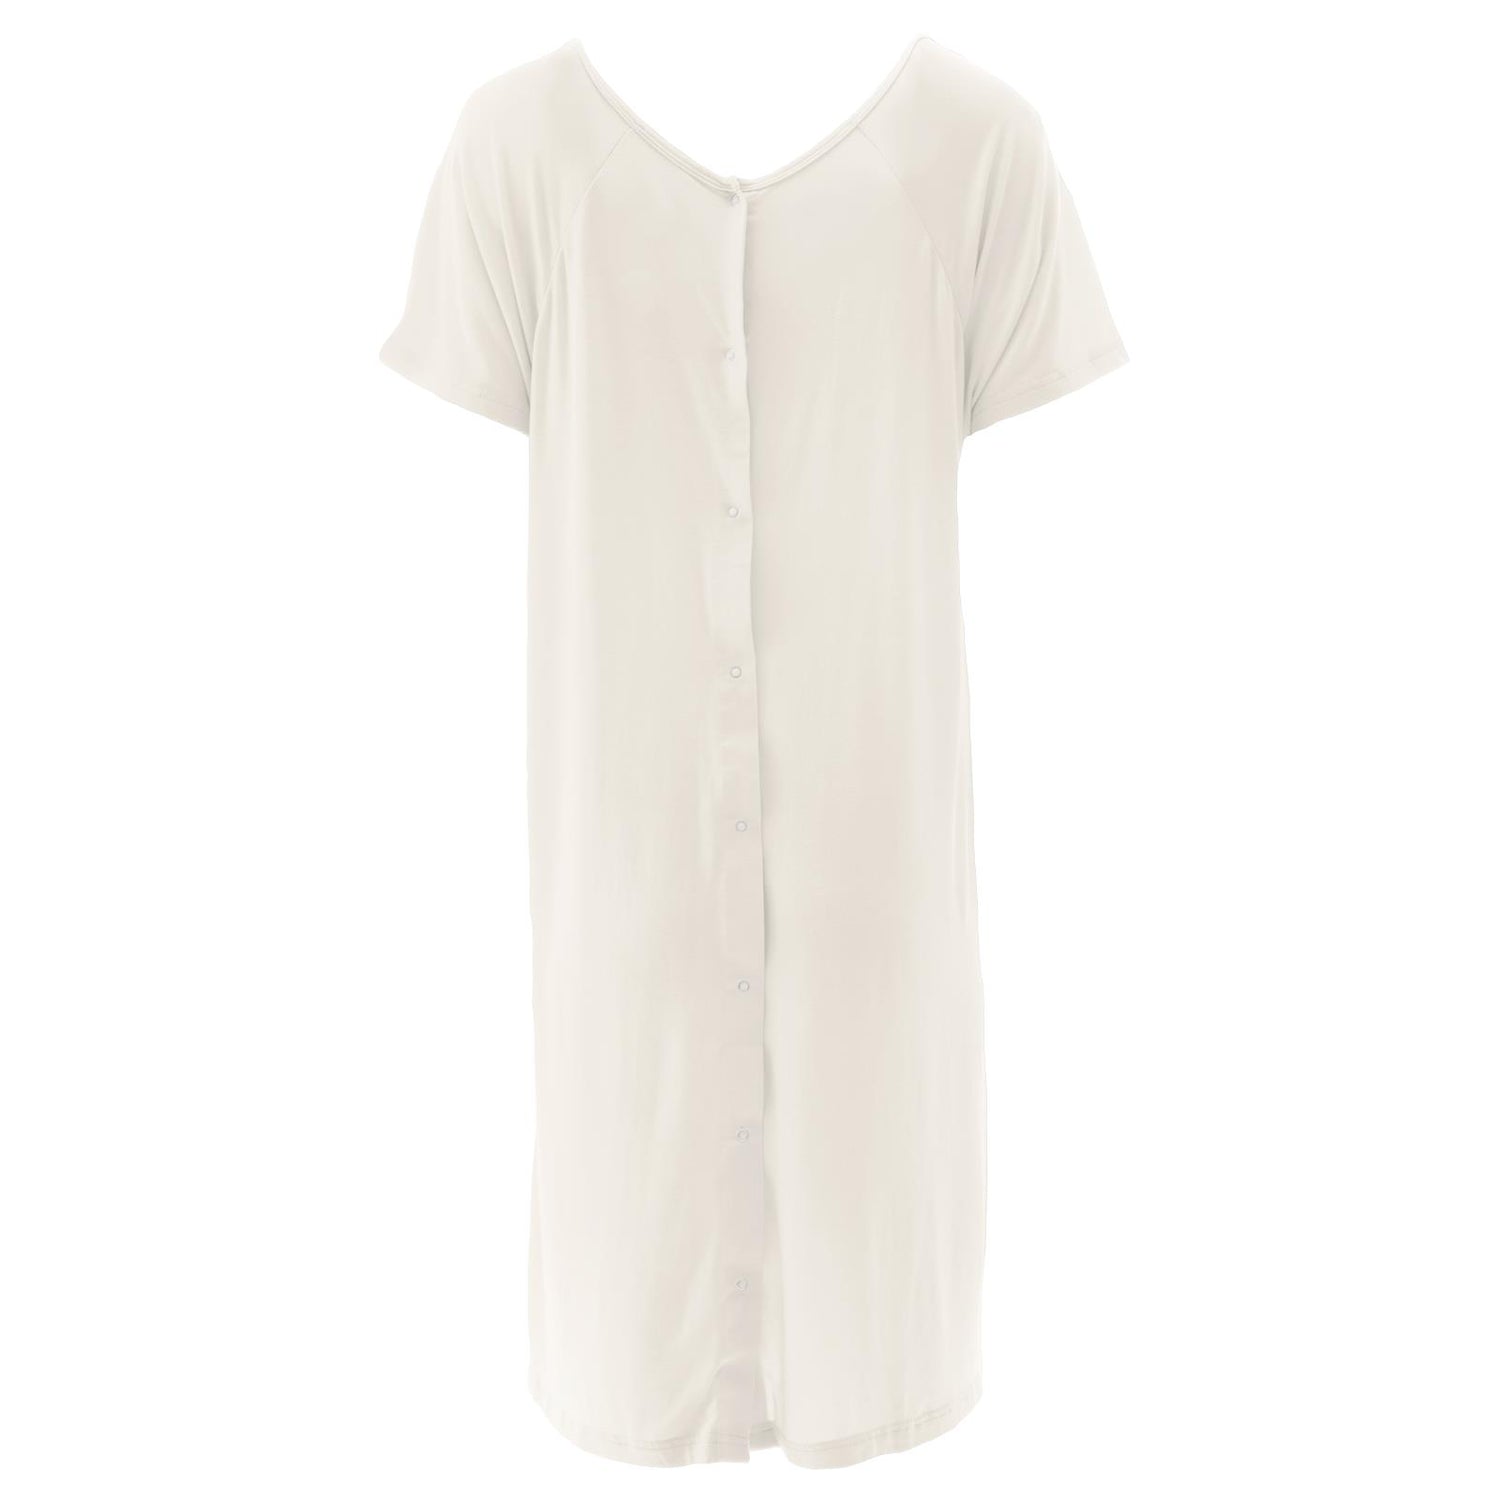 Women's Hospital Gown in Natural